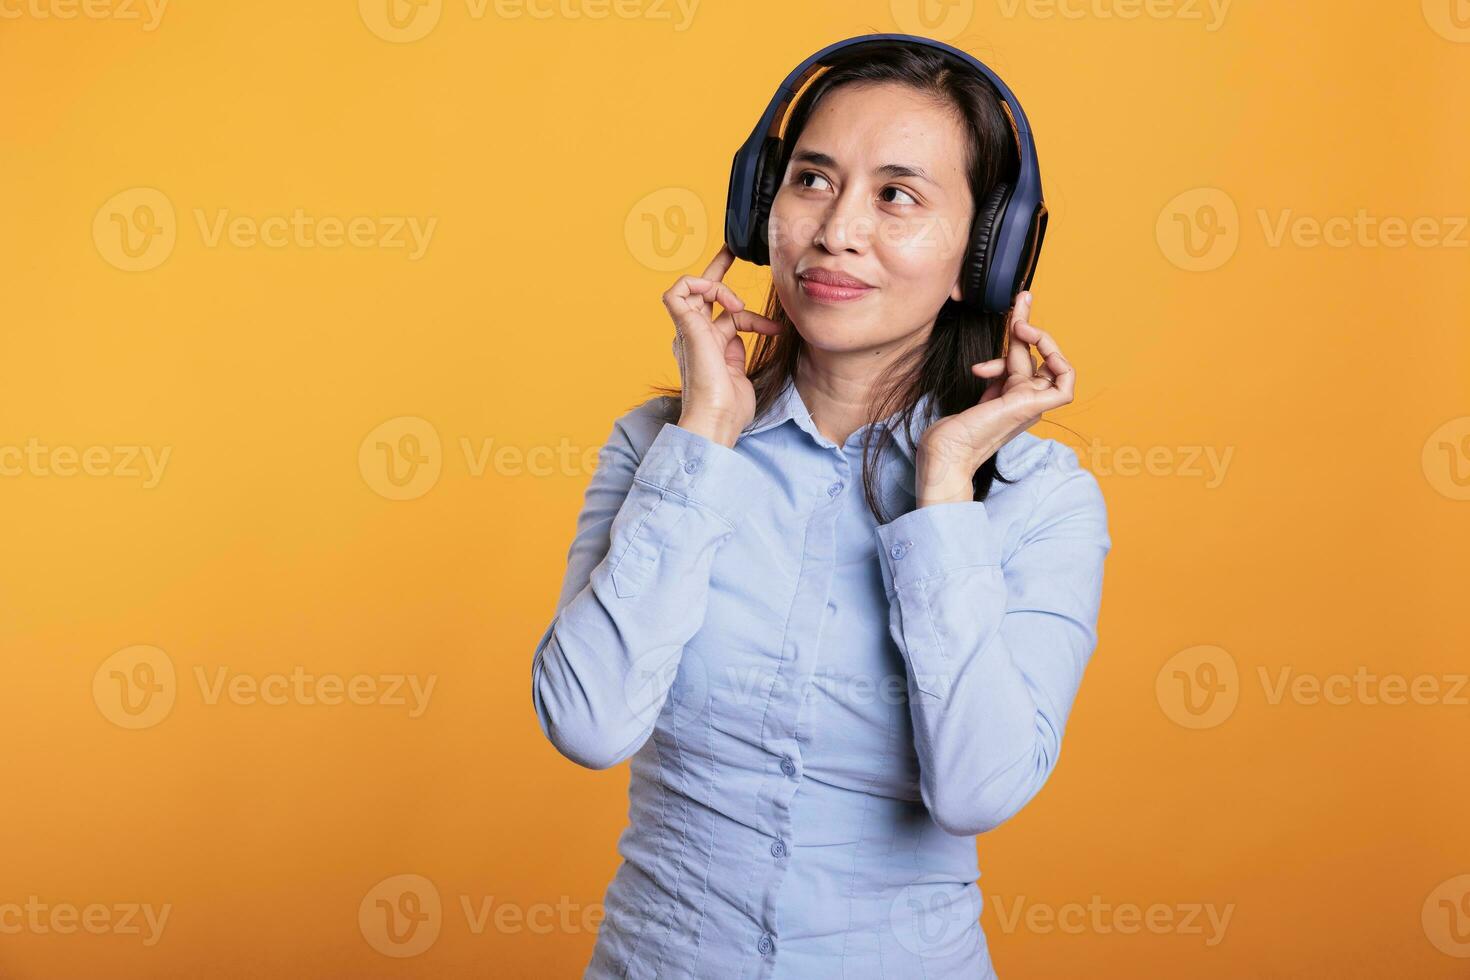 Cheerful woman with headset realaxing listening music, dancing over yellow background. Asian adult having fun in studio, showing dance moves during break time. Entertainment concept photo